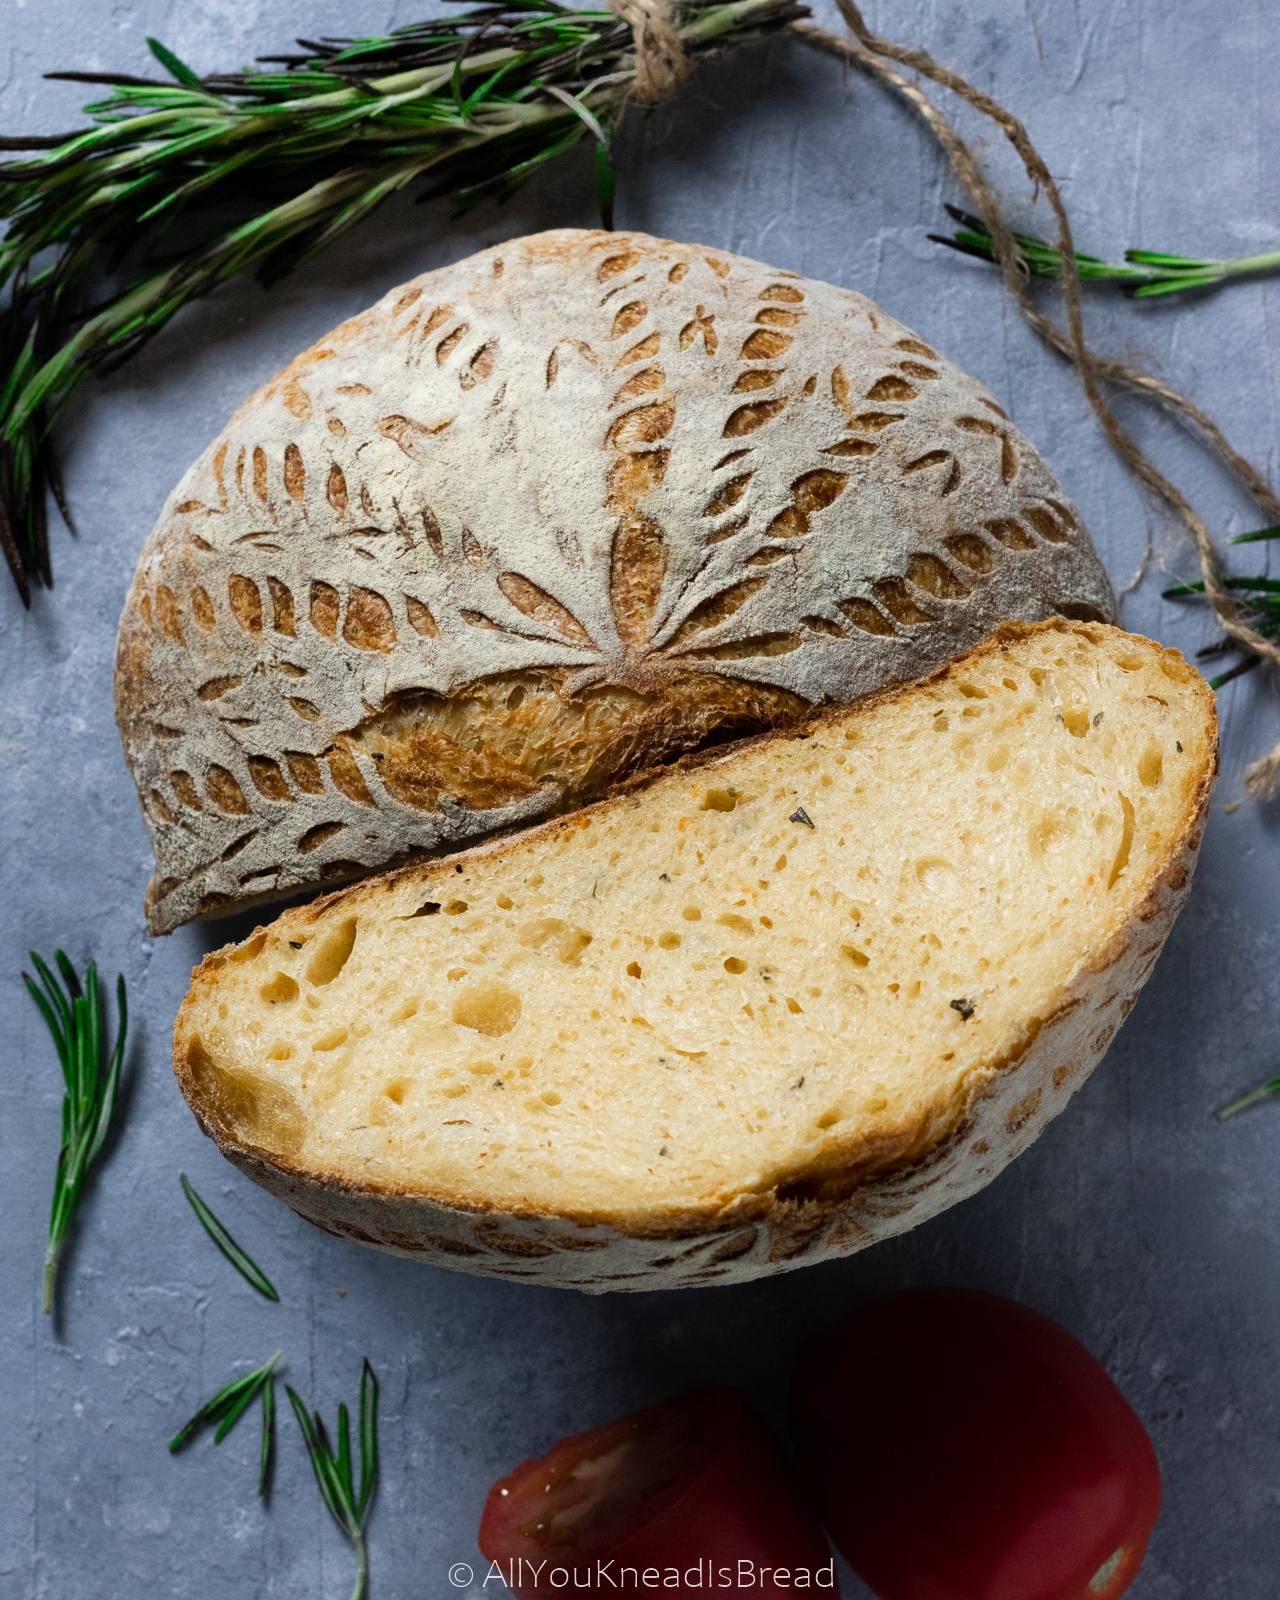 Tomato and rosemary sourdough bread - All you knead is bread